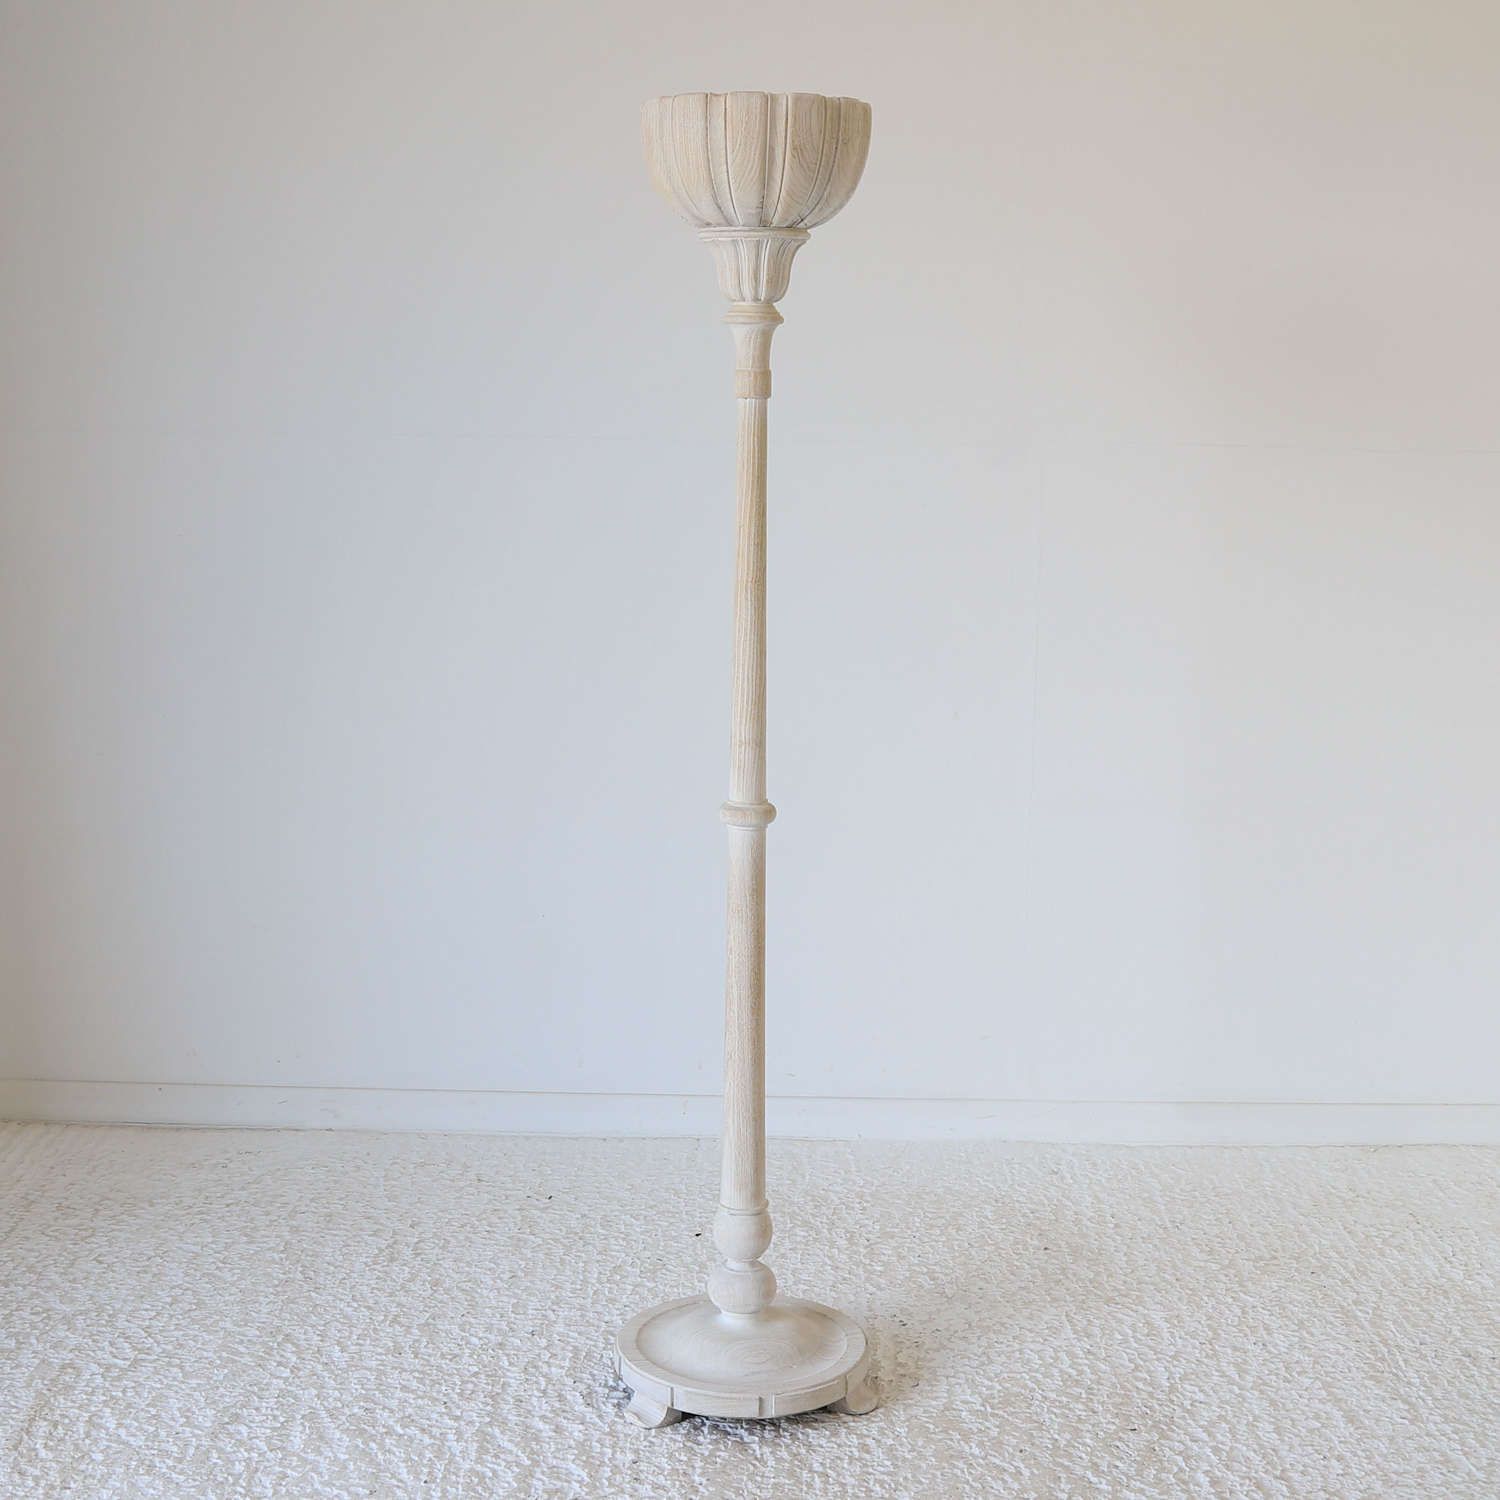 Art Deco Torchère Uplighter Lamp with Petal Bowl shaped top